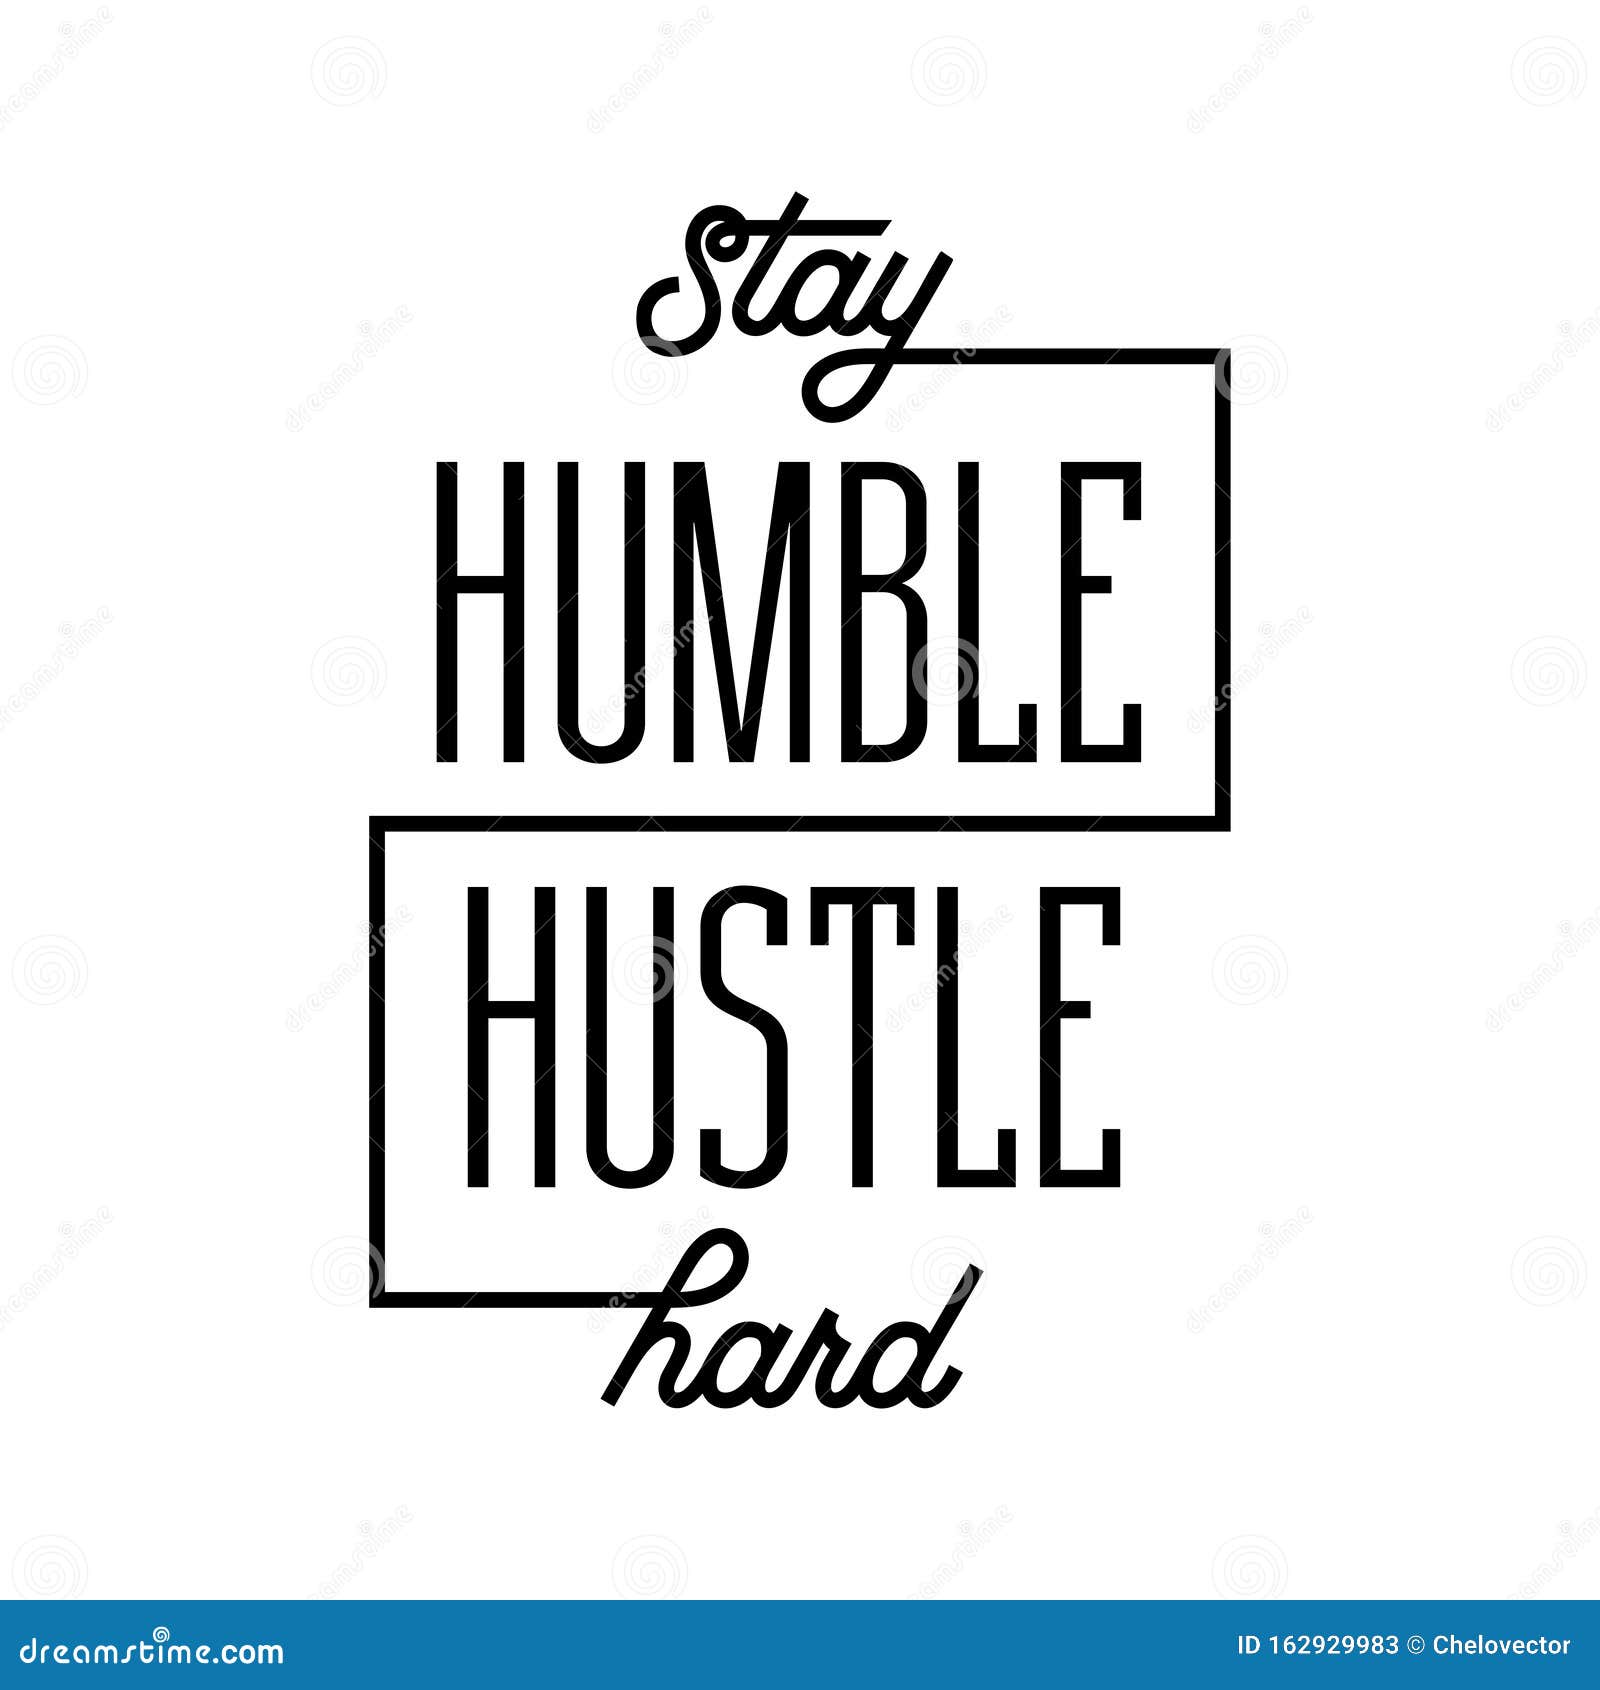 16 x 23, White Vinyl Wall Art Decal Stay Humble Hustle Hard Inspirational Indoor Outdoor Living Room Office Work Quotes Modern Motivational Home Bedroom Apartment Decor 16 x 23